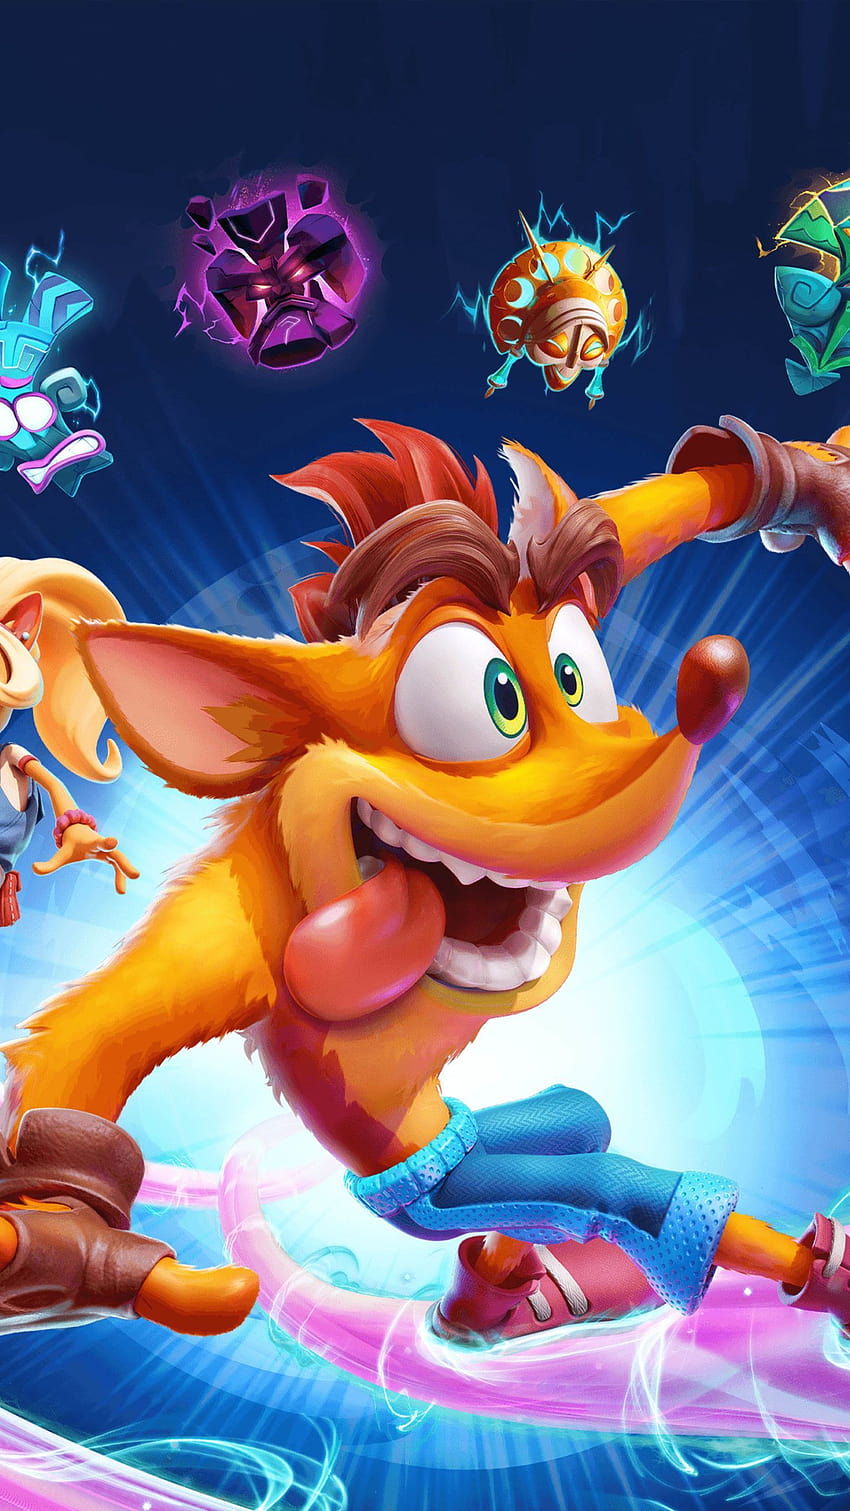 Crash Bandicoot 4 It's About Time Game Poster Ultra Mobile in 2020, crash bandicoot 4 its about time HD phone wallpaper